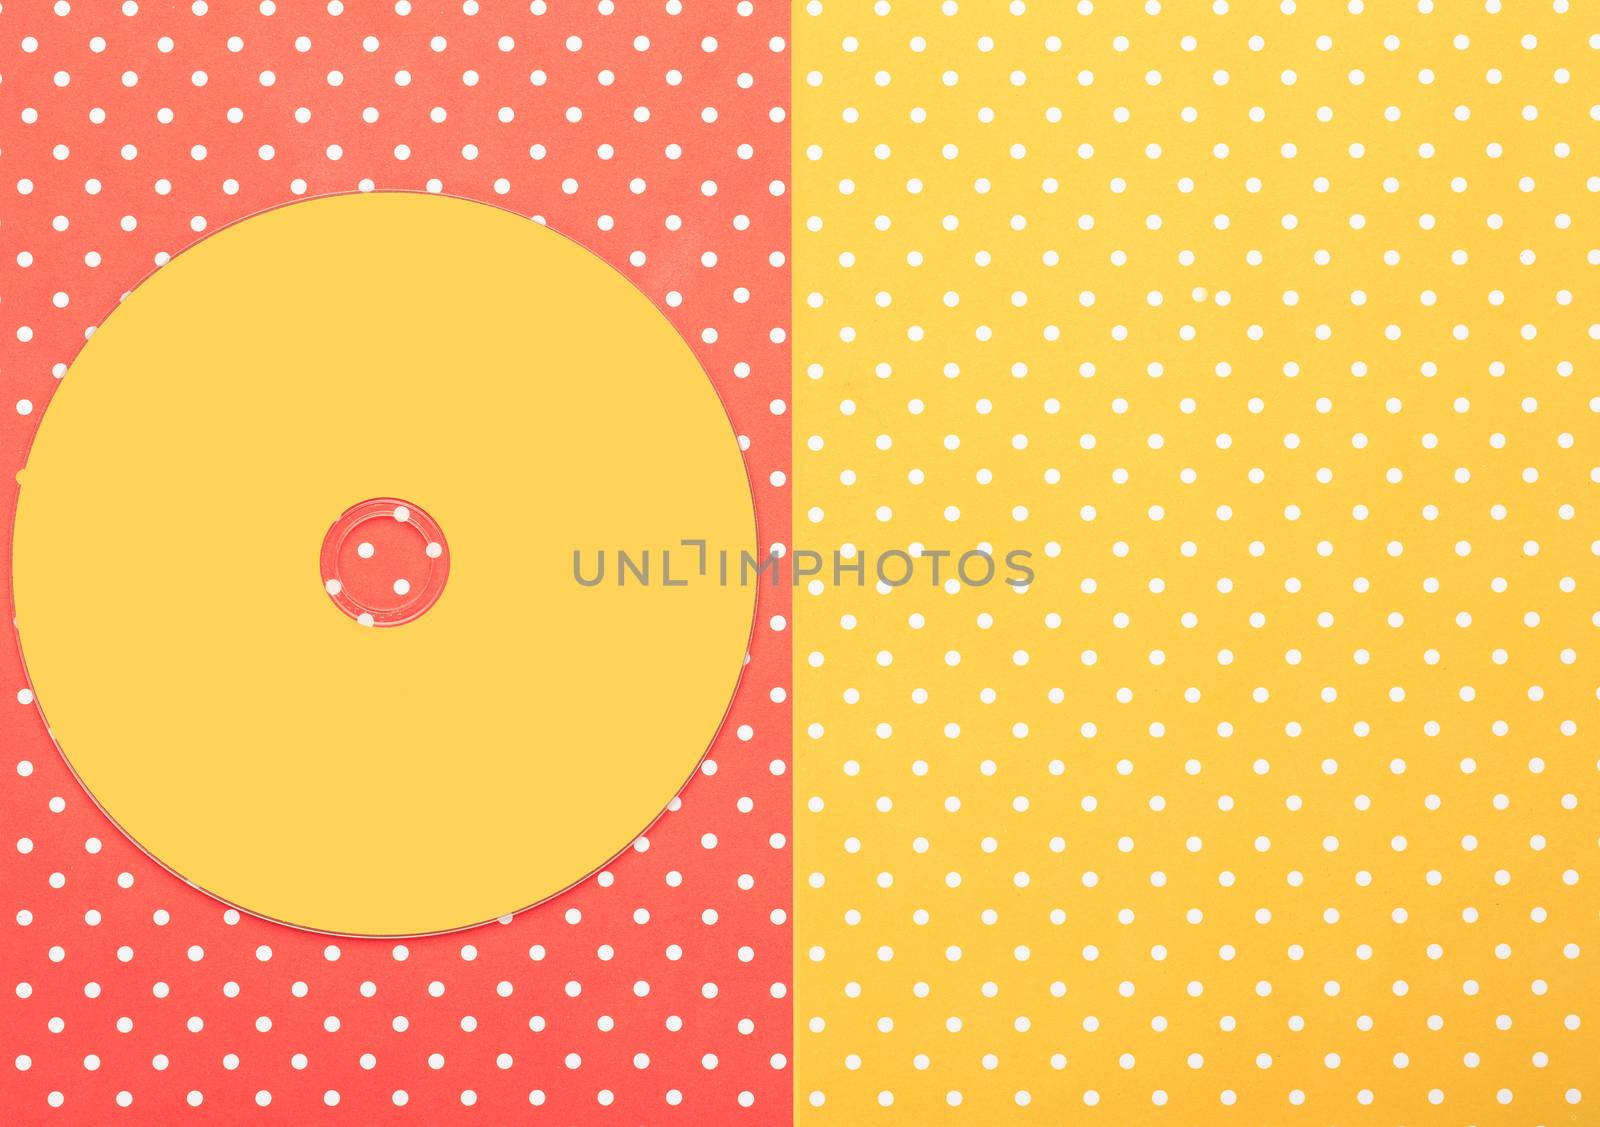 Compact disk CD  with colorful topped background by nachrc2001